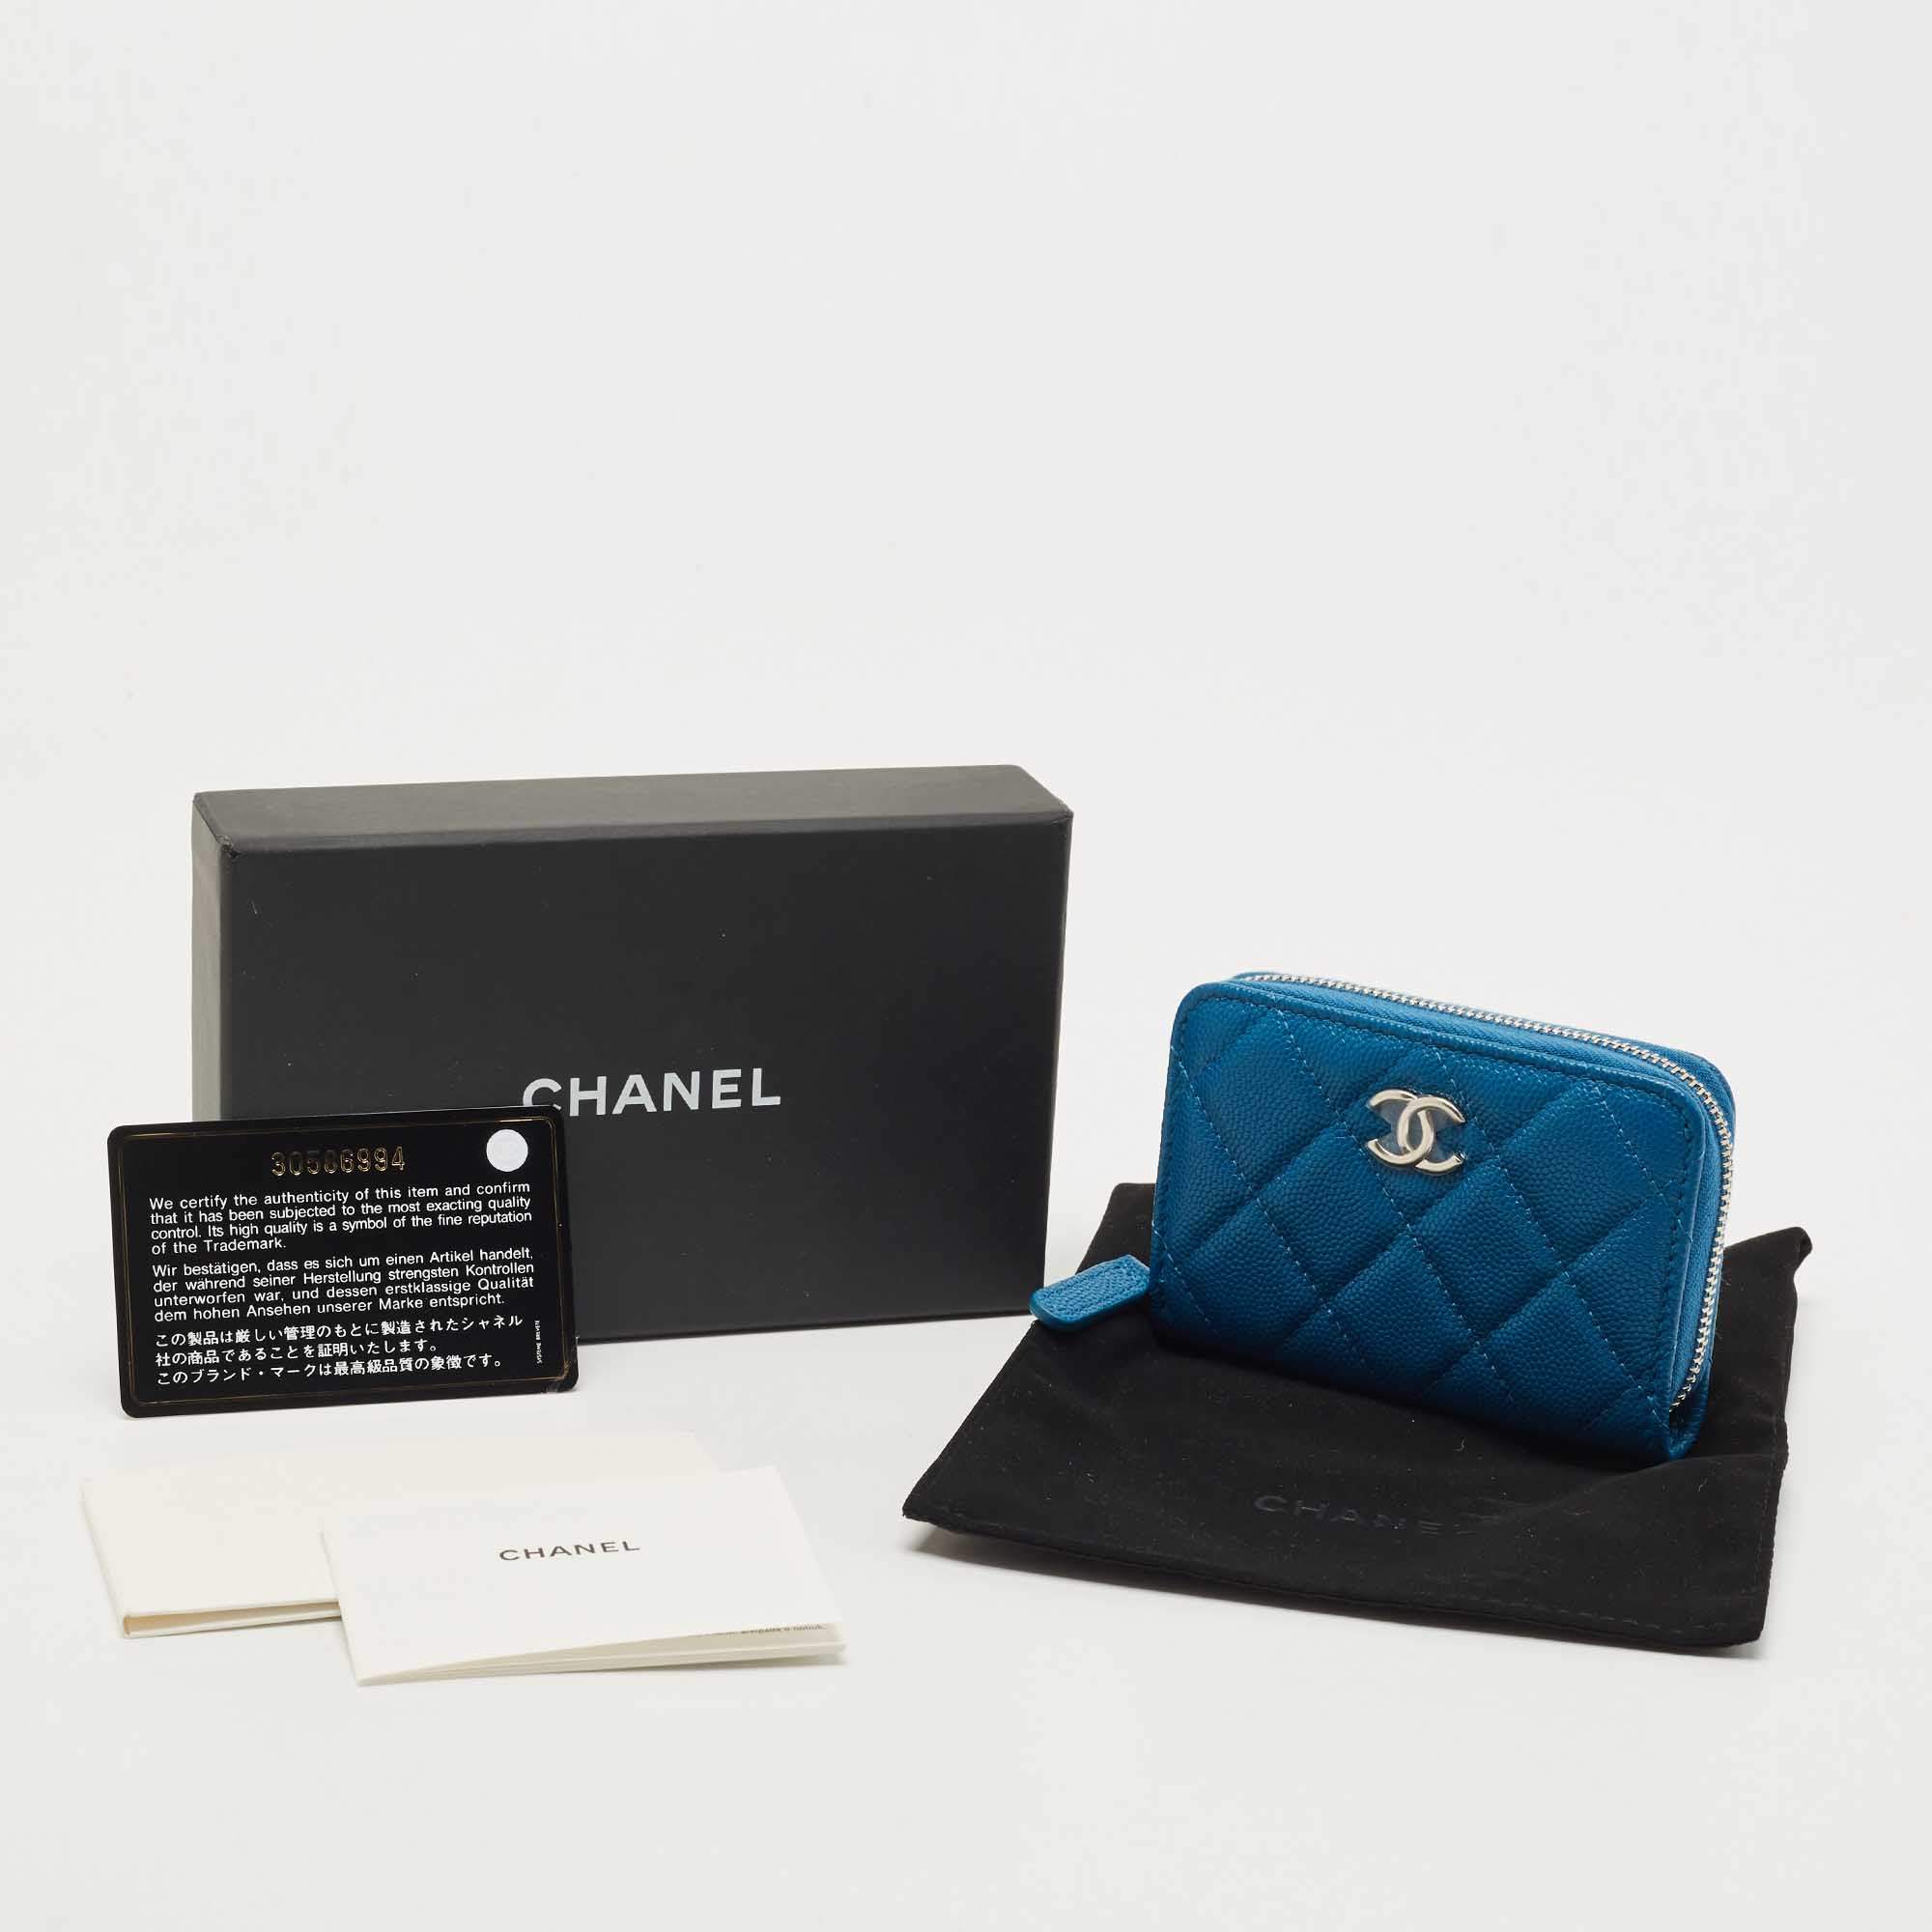 Chanel Classic Zipped Coin Purse